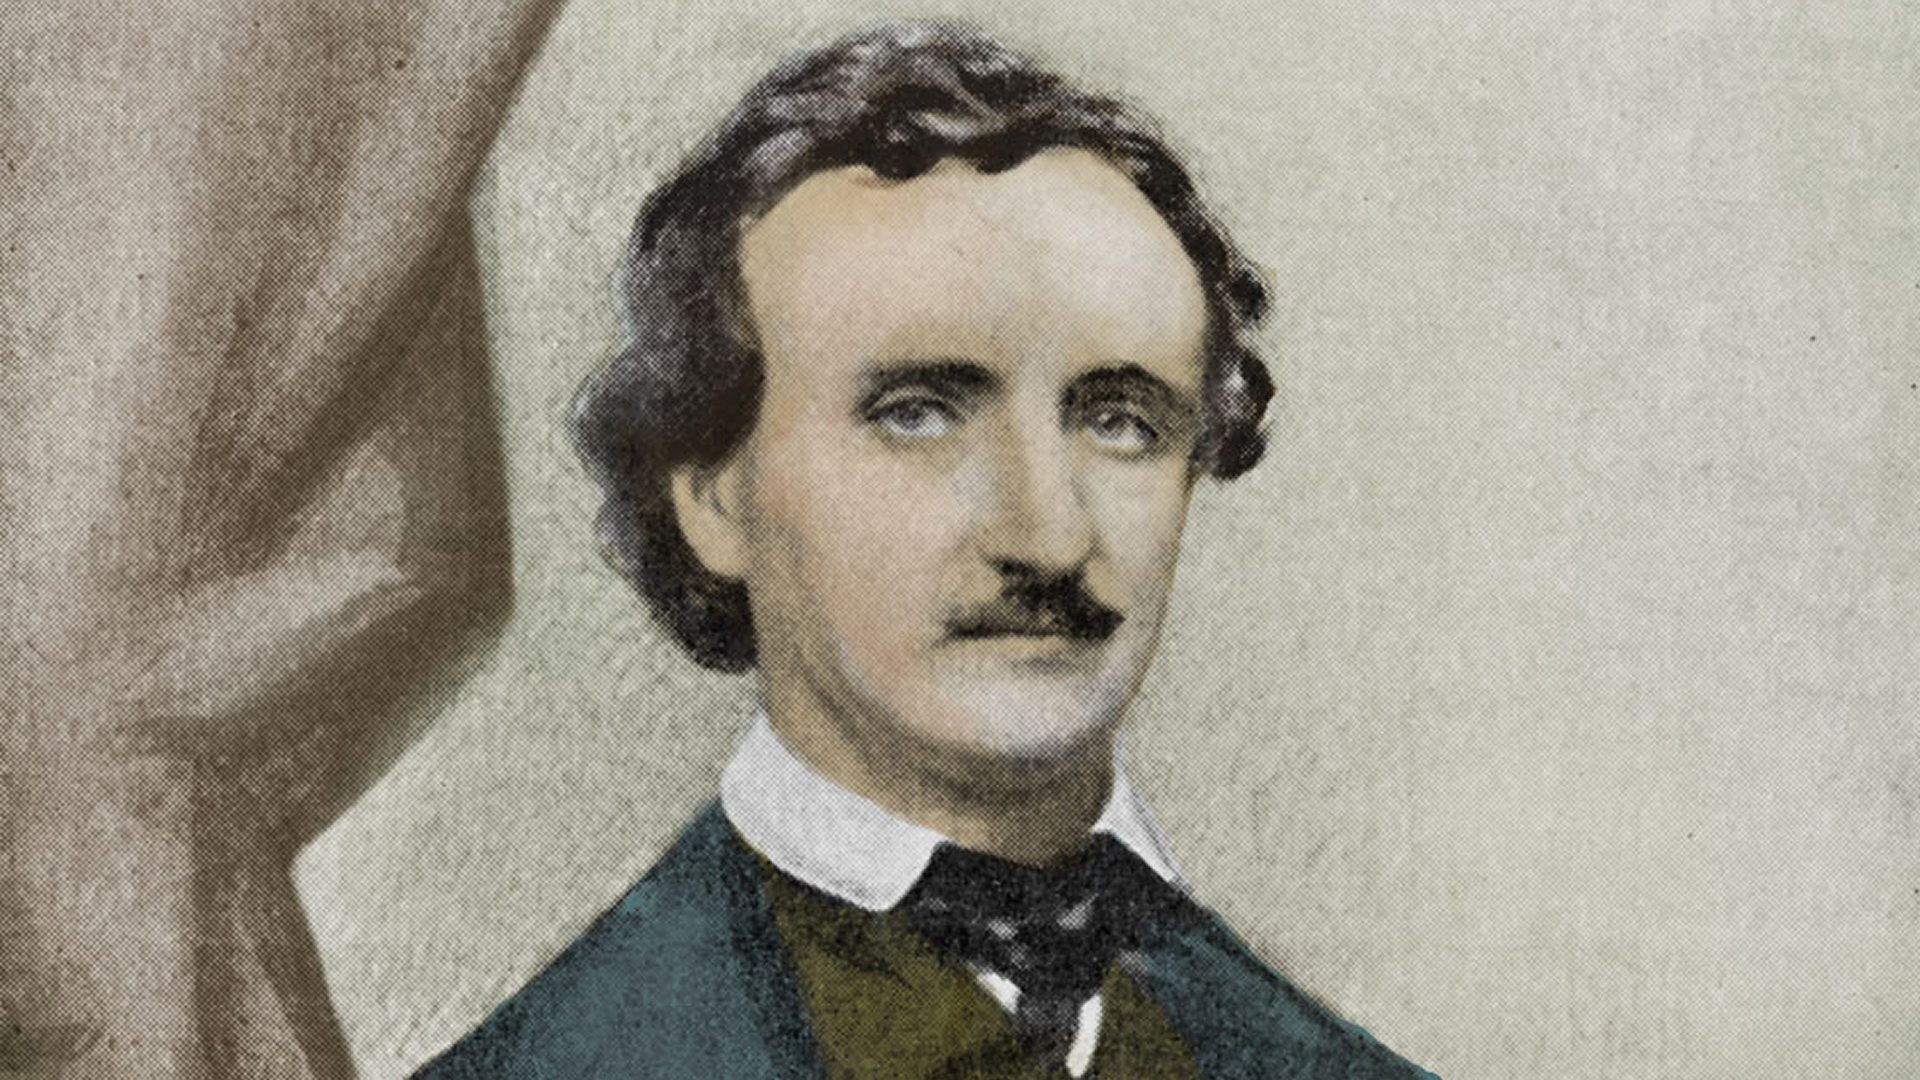 How Did Edgar Allan Poe Die? - A New Clue May Solve the Mystery